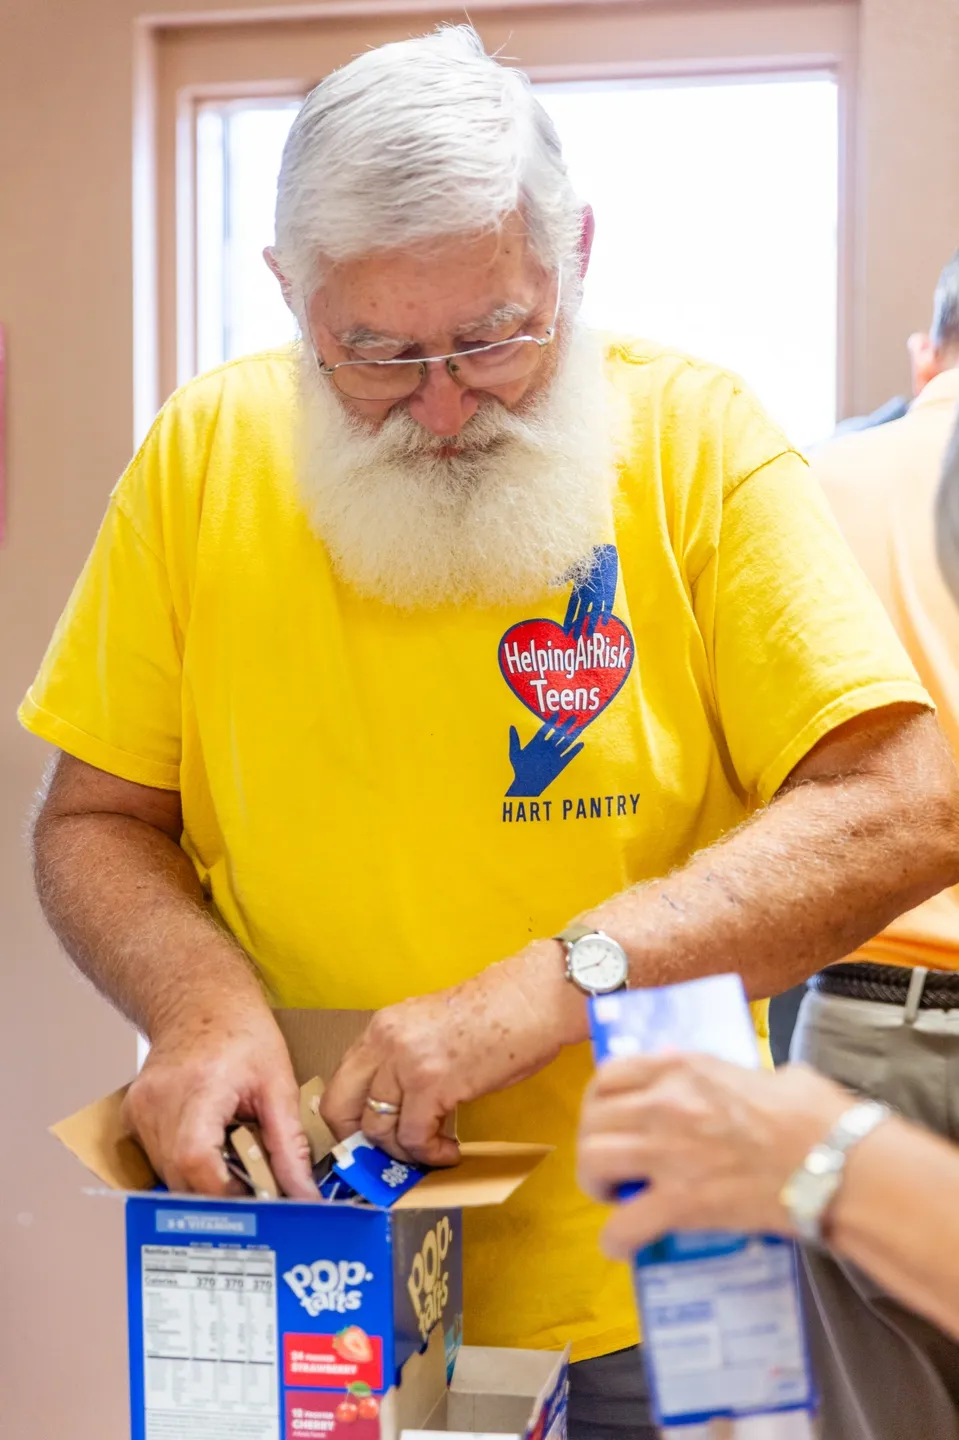 A man in yellow shirt cutting paper with scissors.